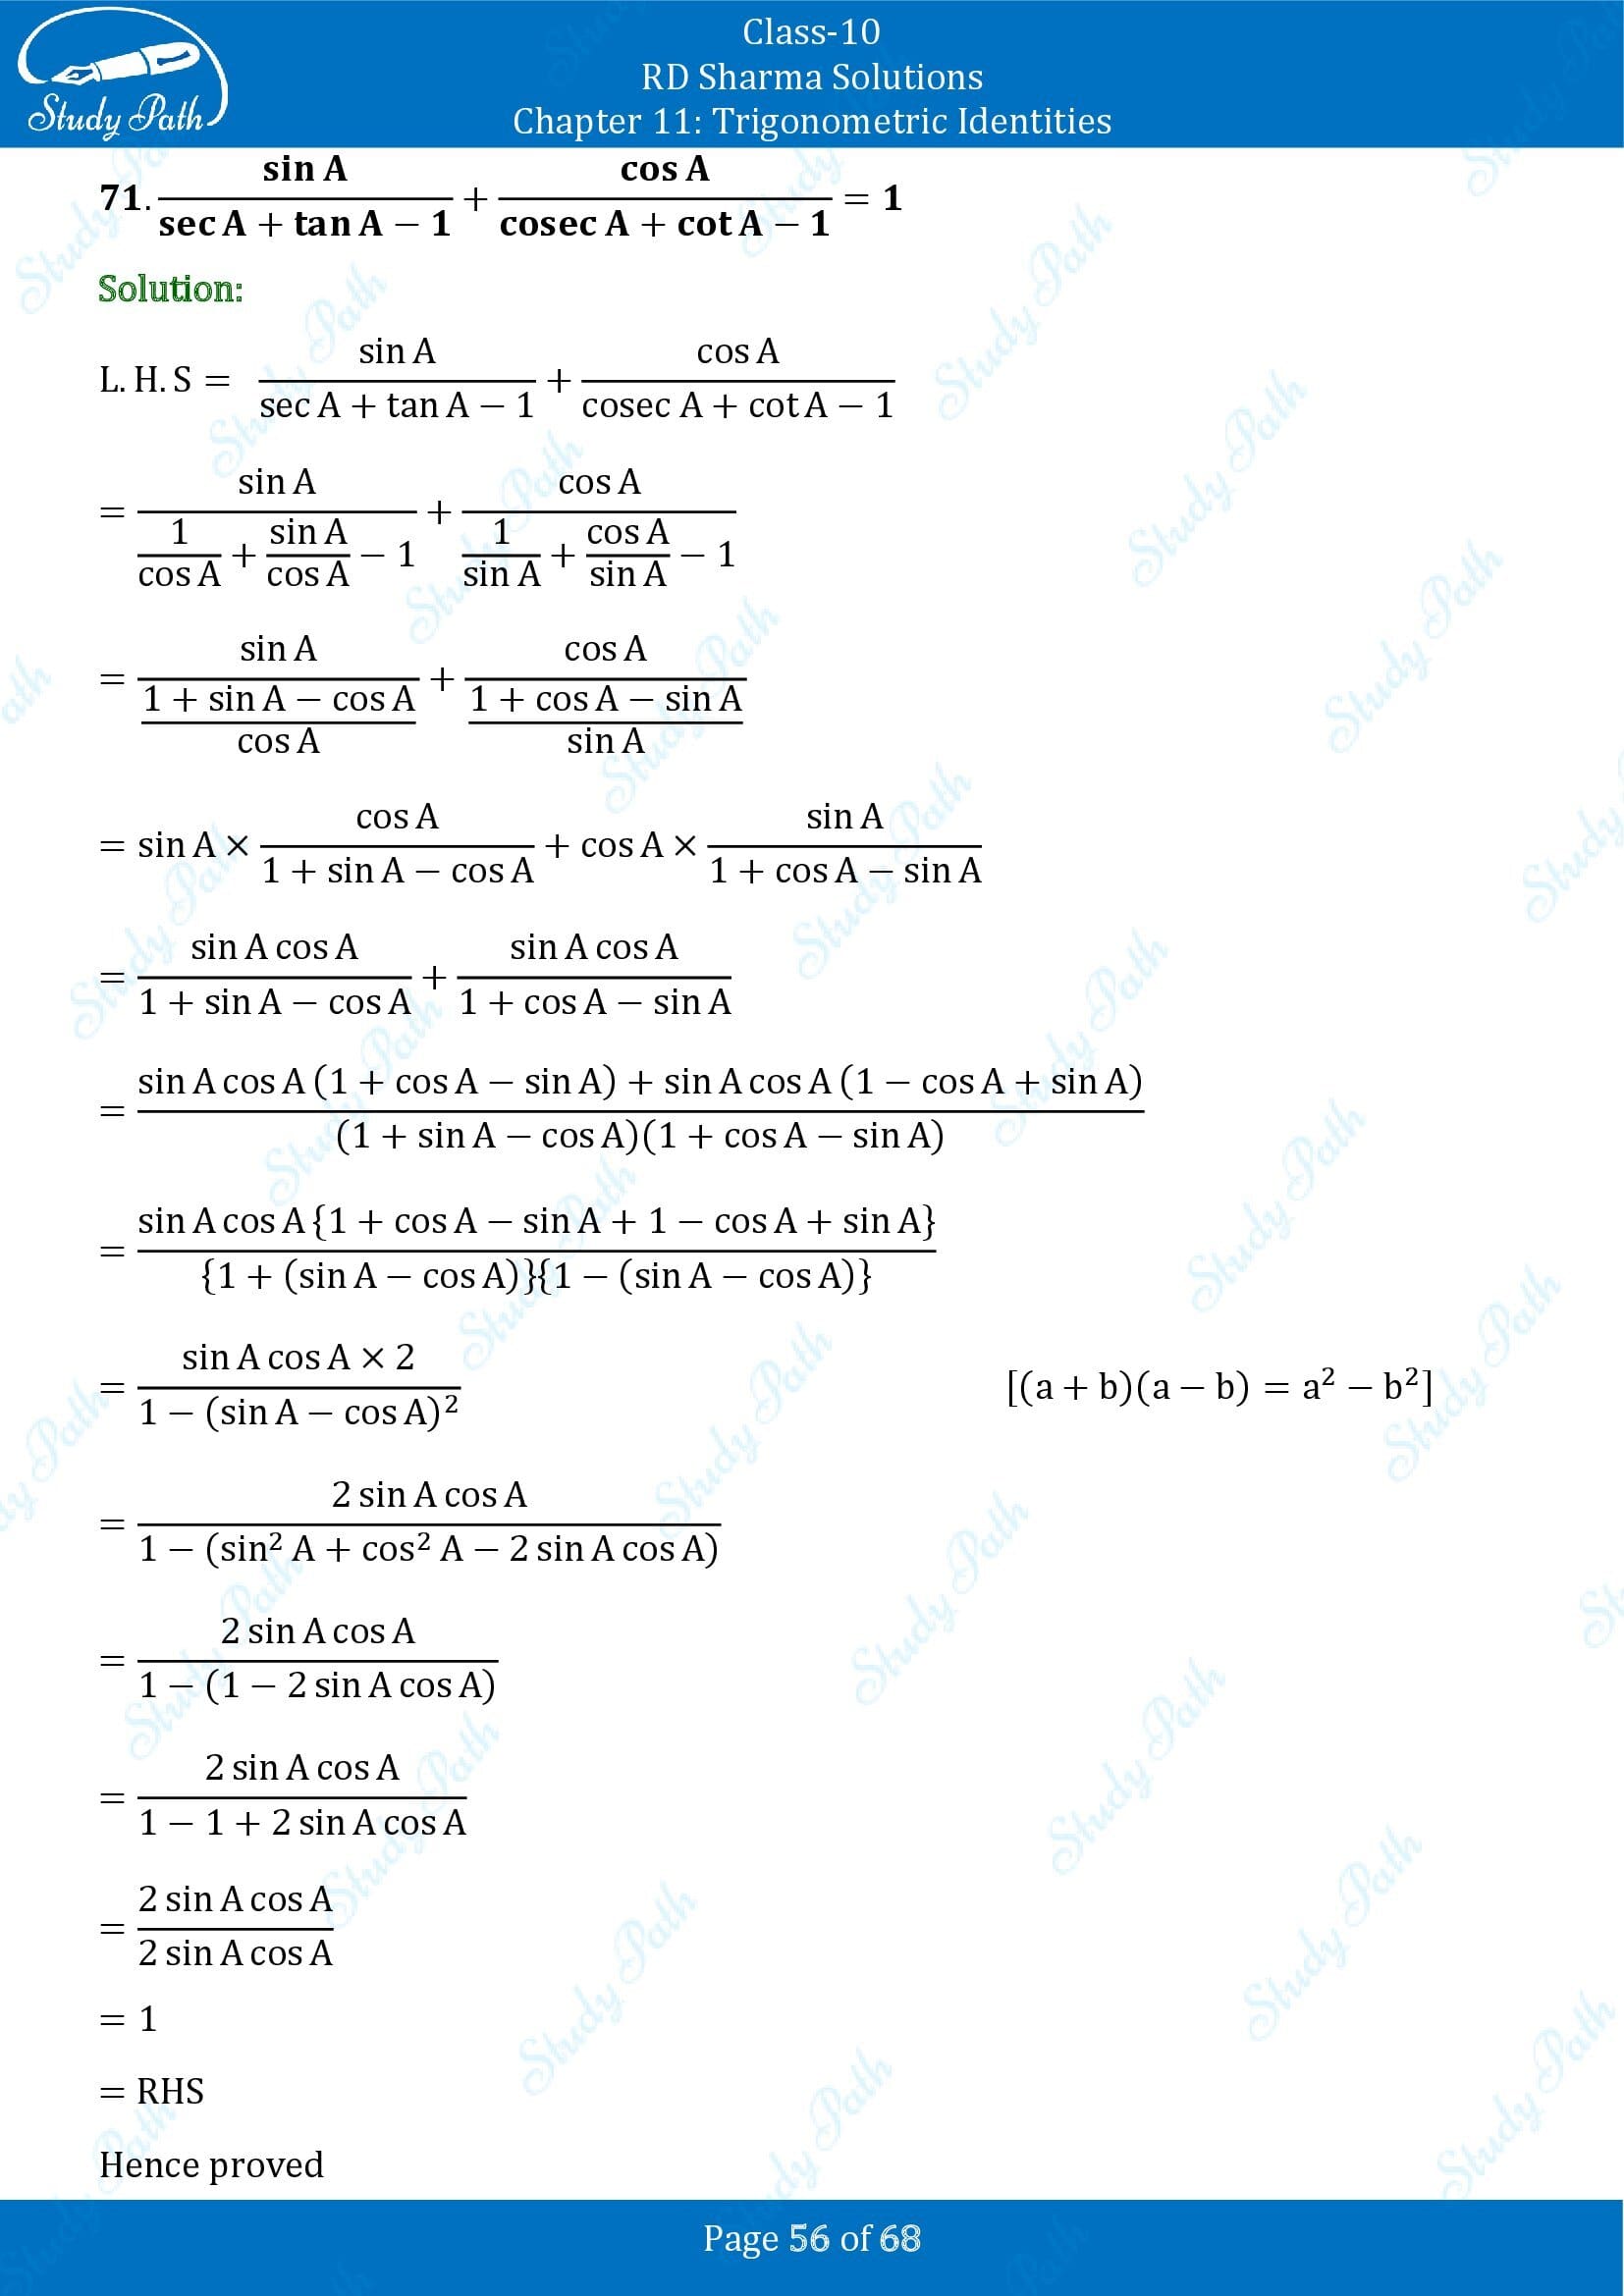 RD Sharma Solutions Class 10 Chapter 11 Trigonometric Identities Exercise 11.1 00056